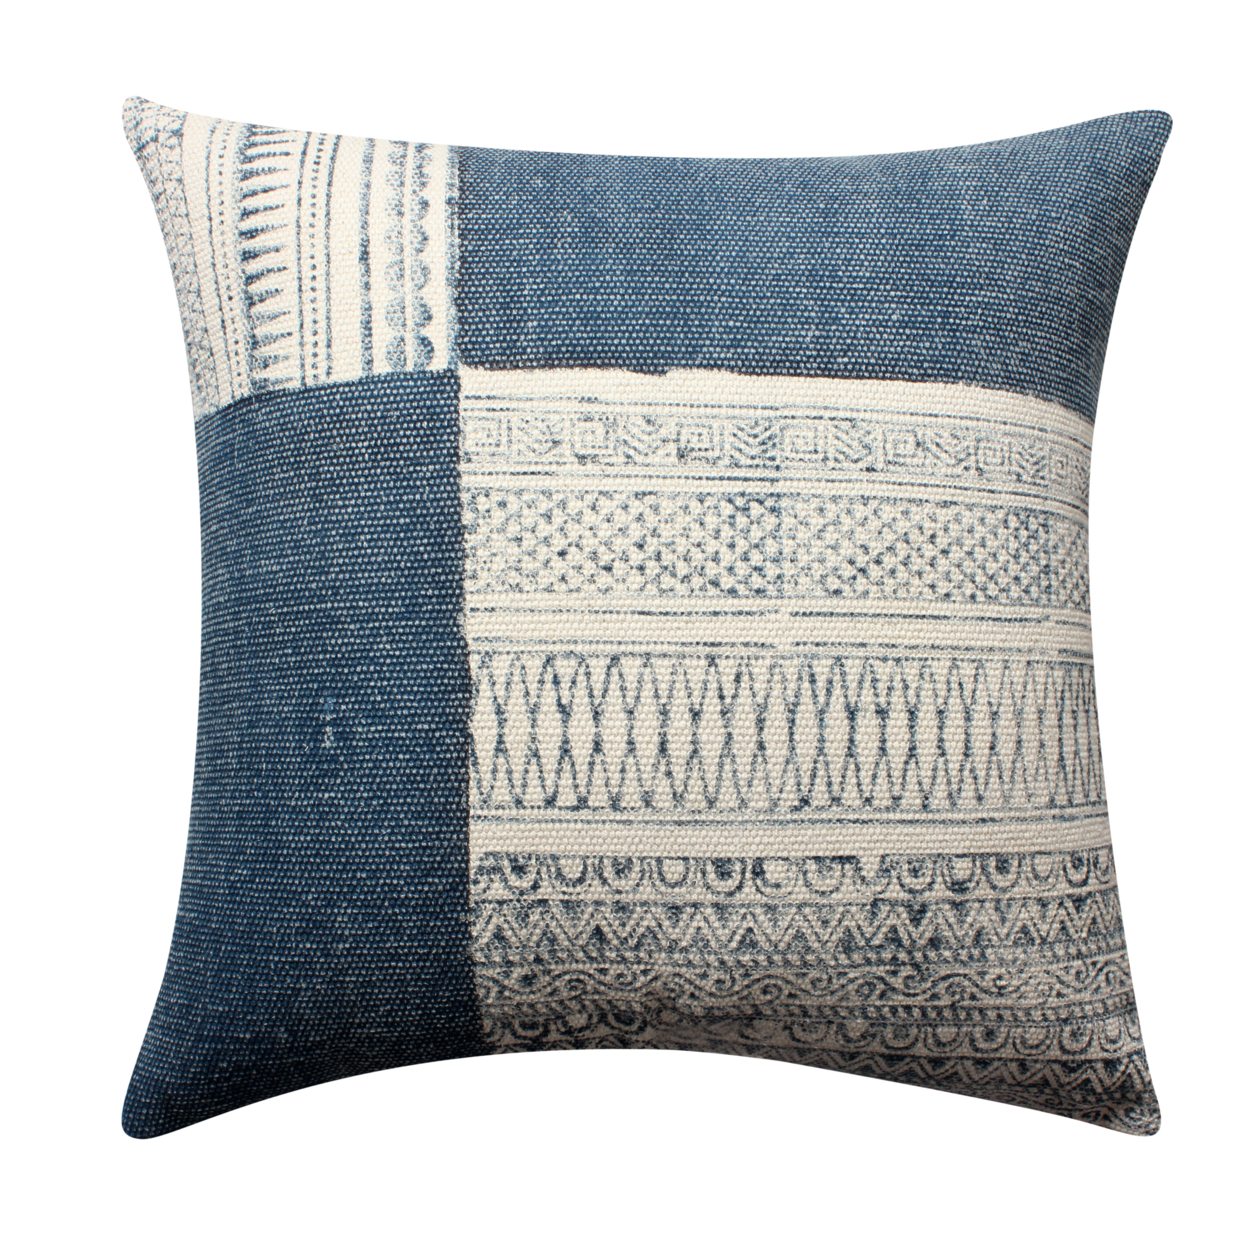 Dae 24 X 24 Square Handwoven Cotton Accent Throw Pillow, Classic Simple Kilim Pattern, Set Of 2, Blue, Off White